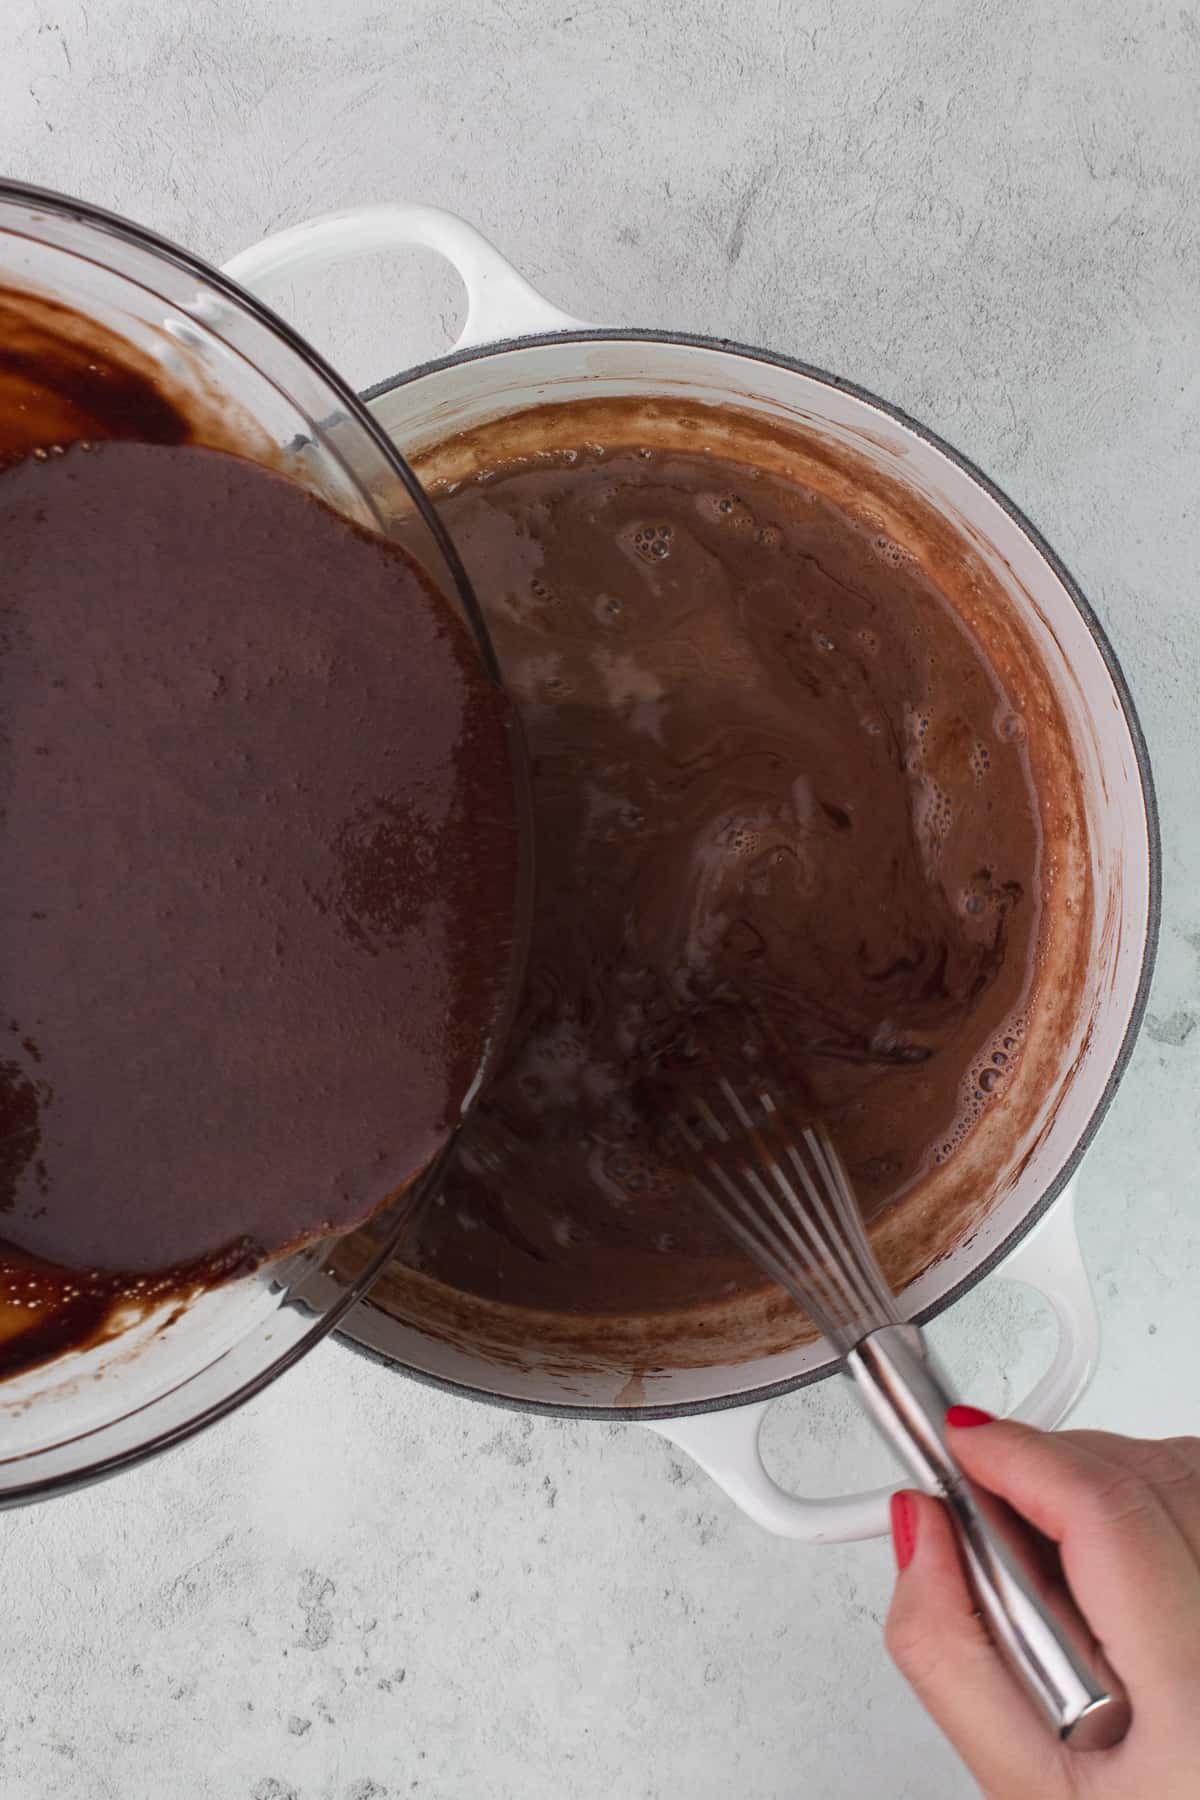 Yolk/chocolate mixture is added back to the pot